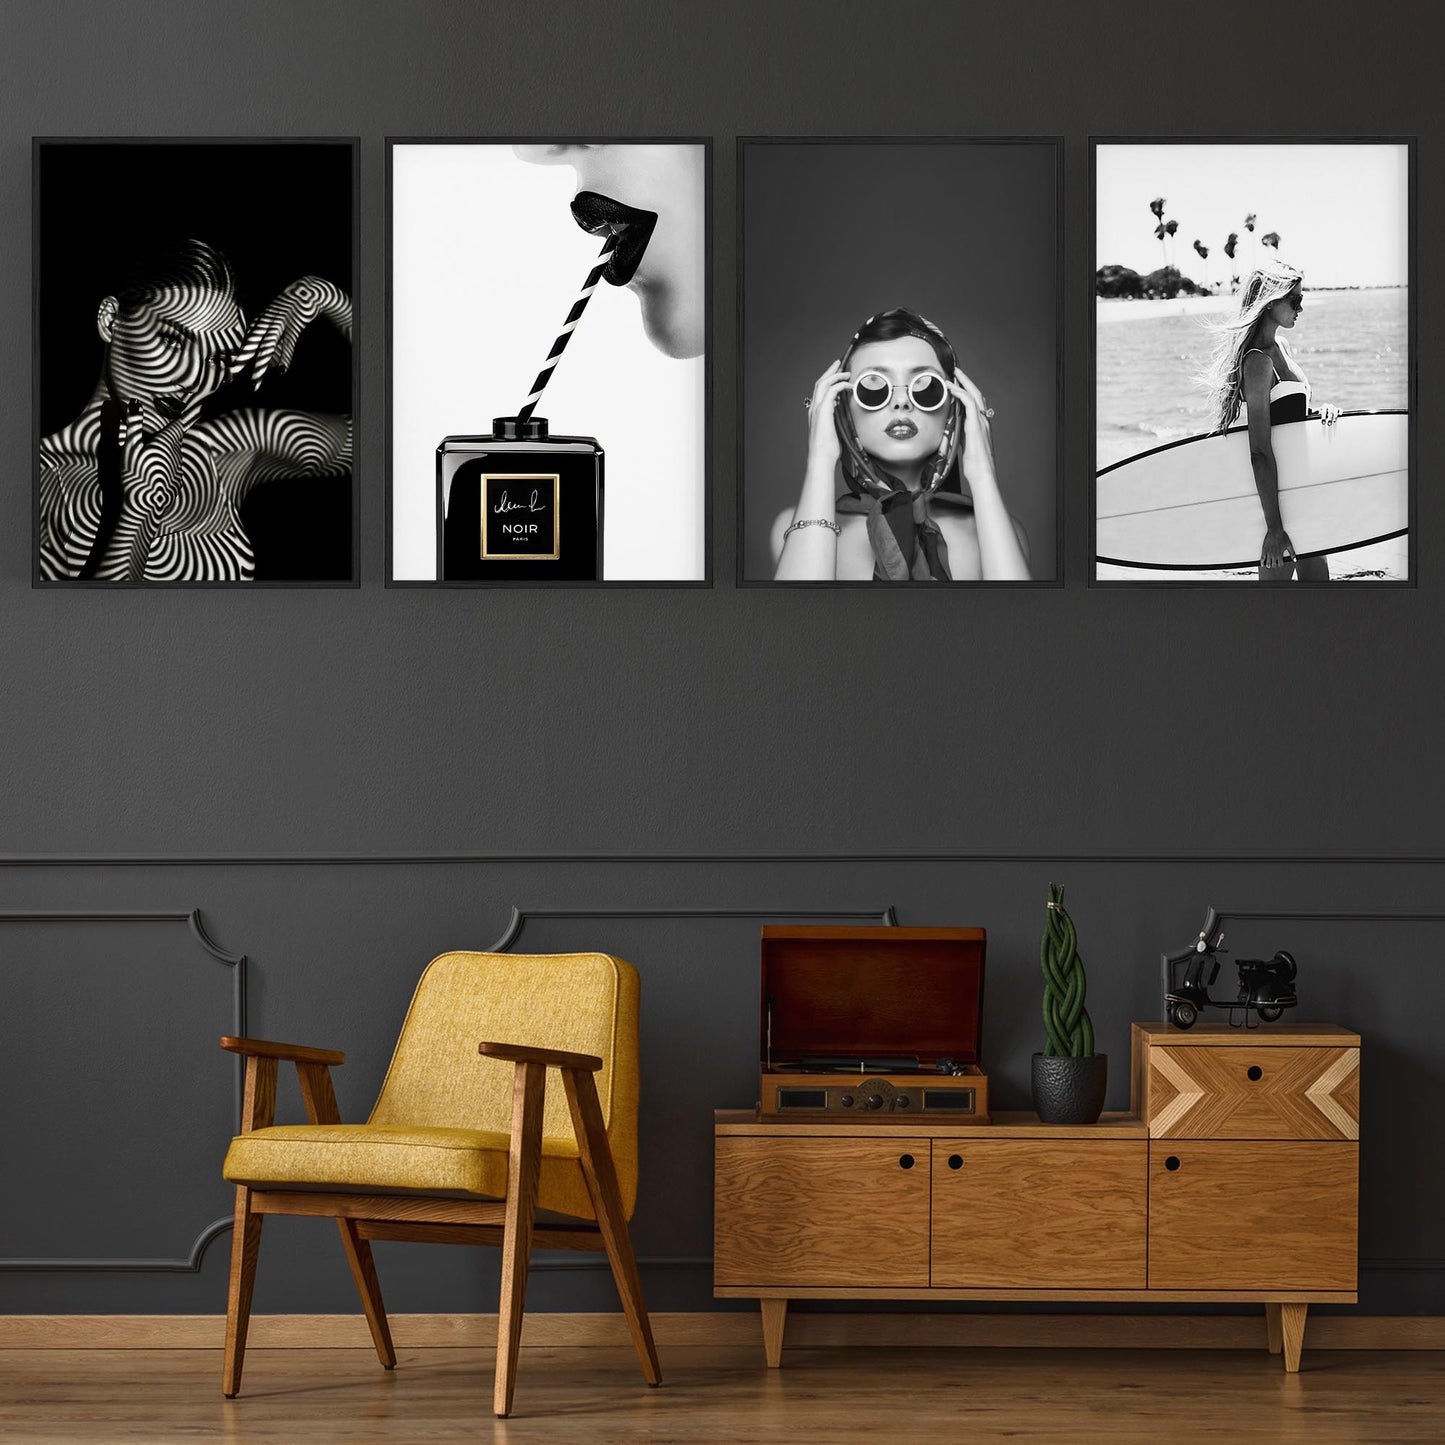 Set of 4 Fashion Inspired Black and White Bedroom Photography Wall Art - The Affordable Art Company